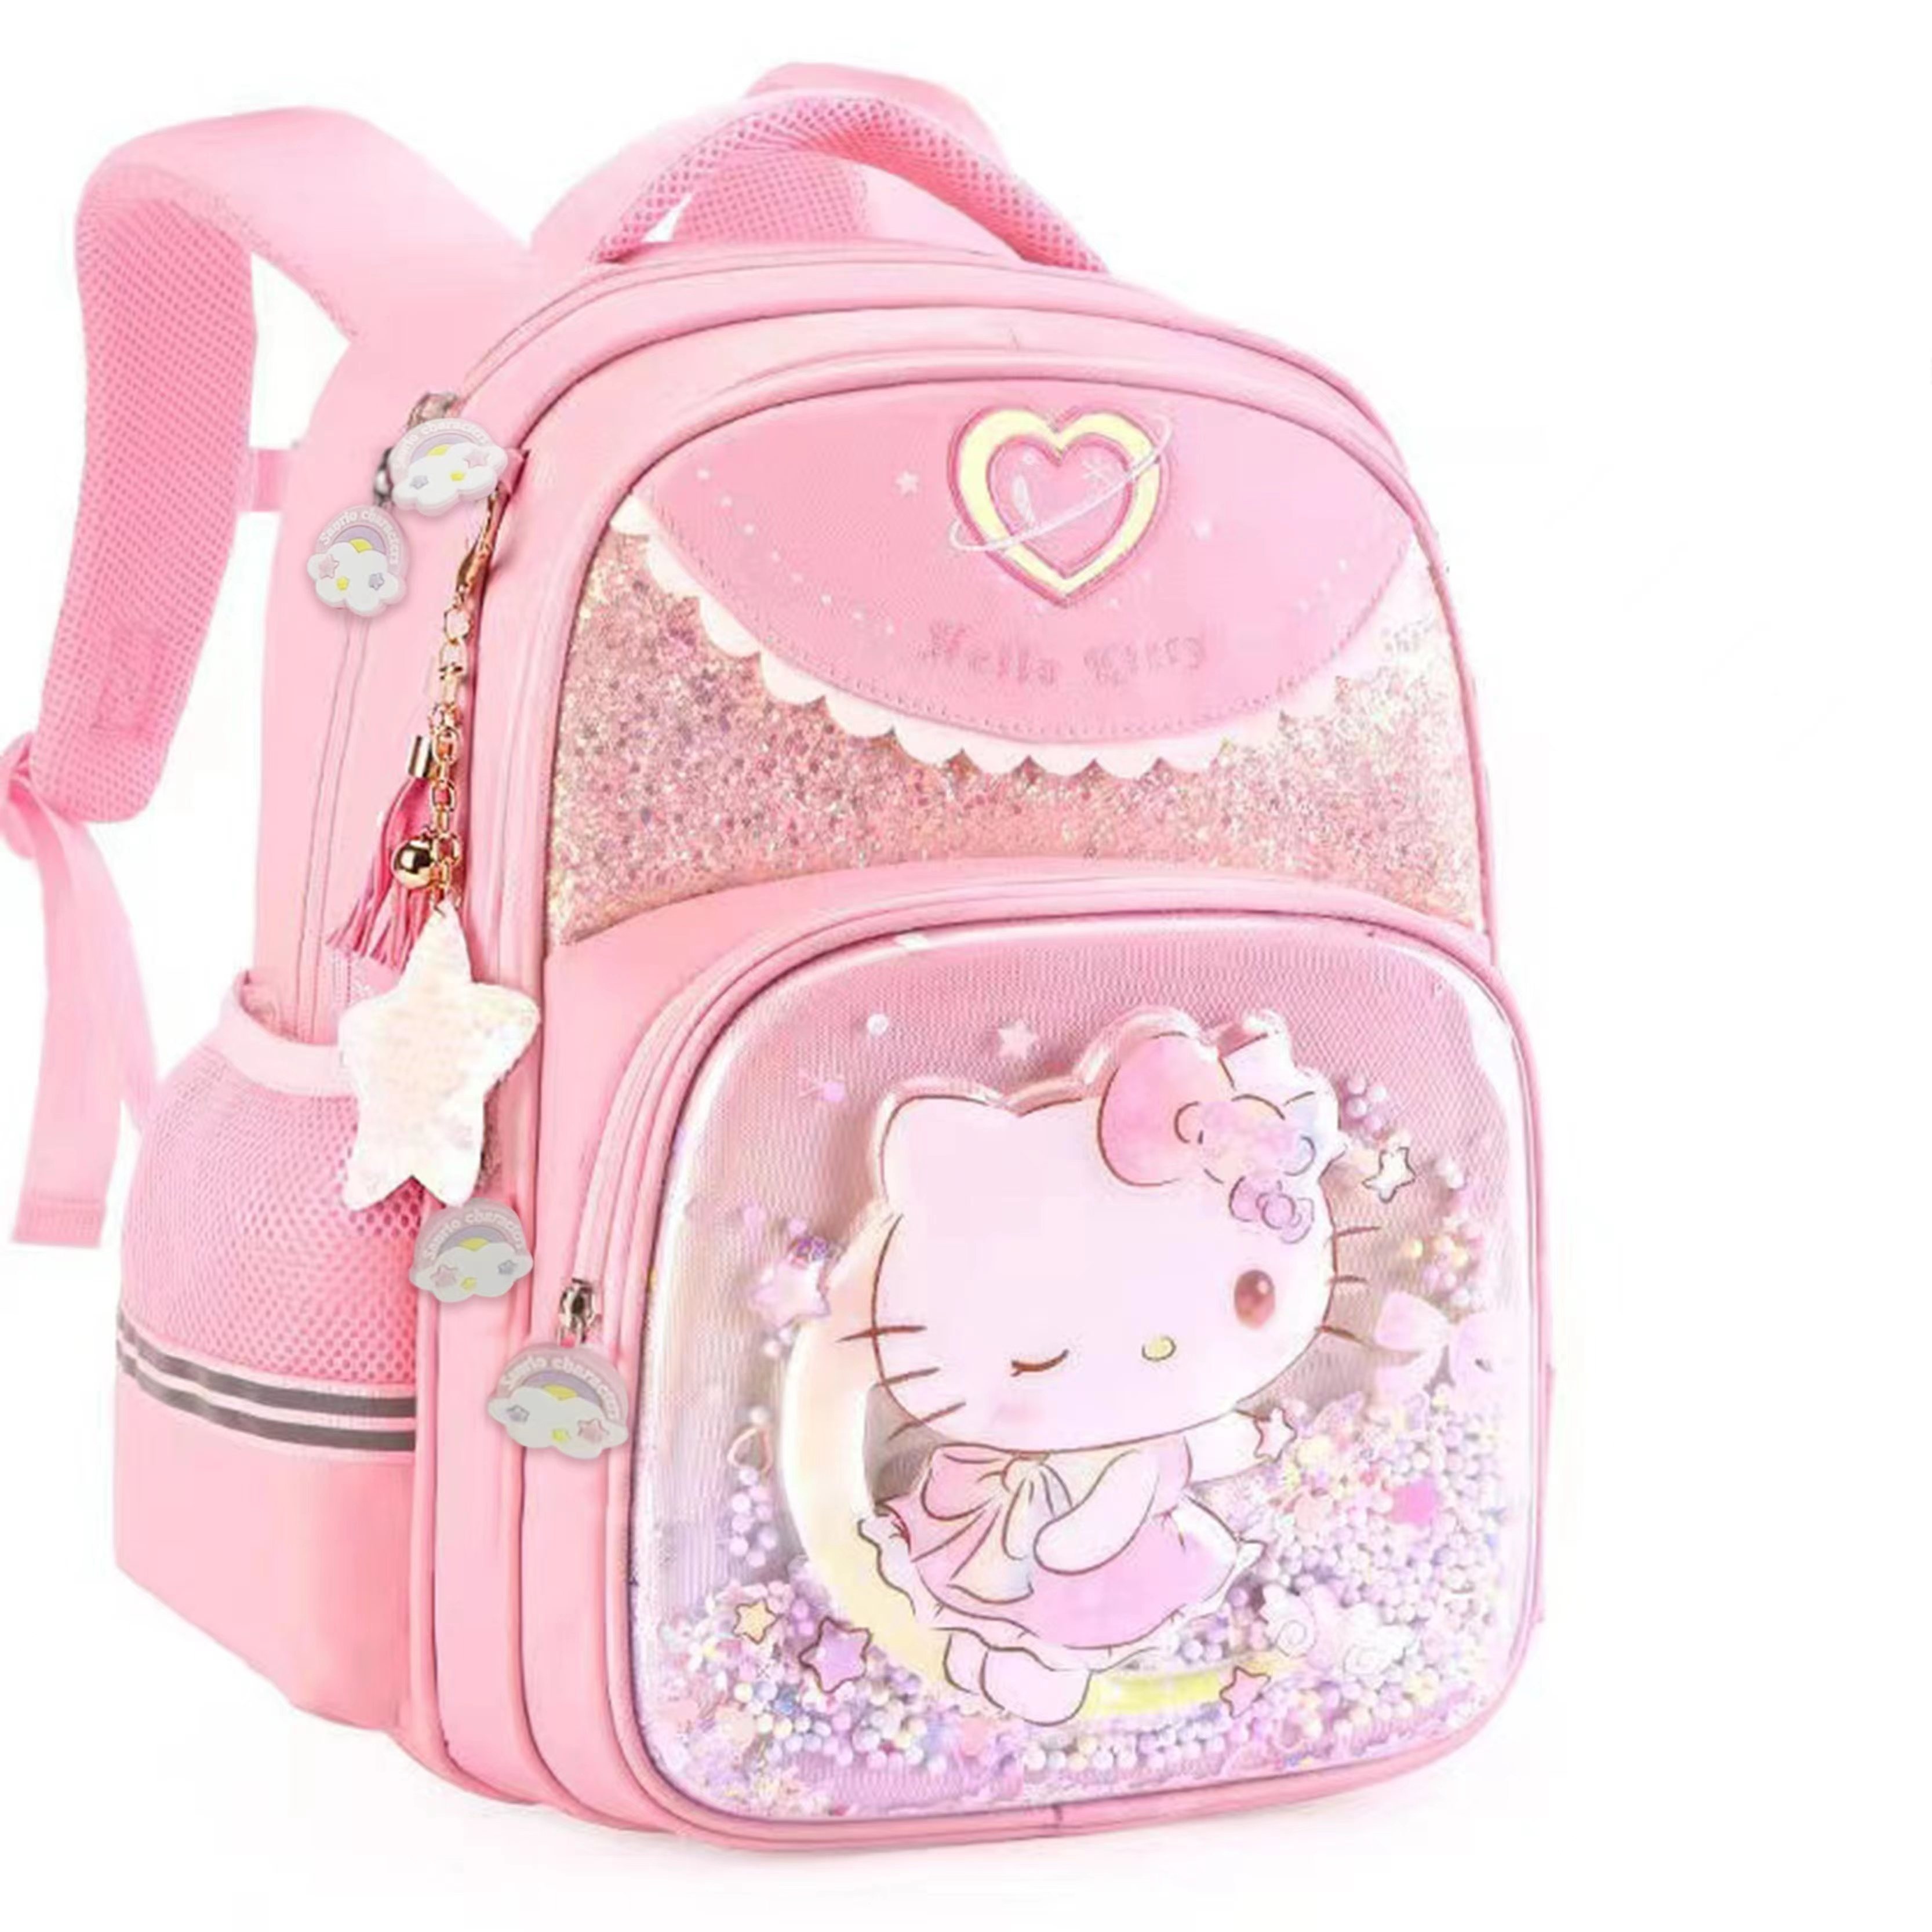 Adorable Hello Kitty Schoolbag - Perfect For Primary School Students Girls!